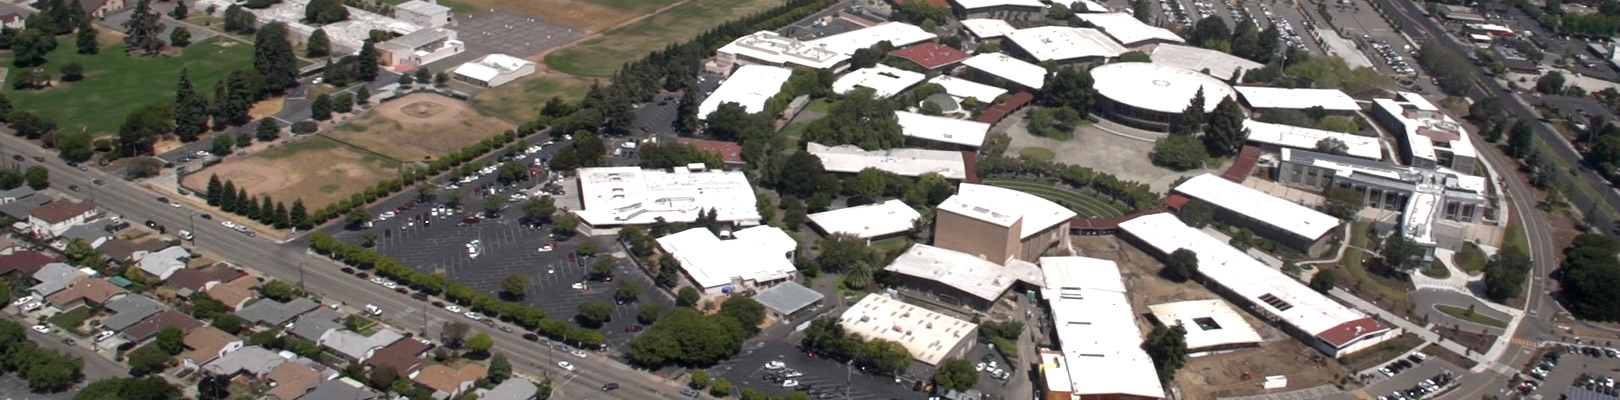 Chabot Campus from above